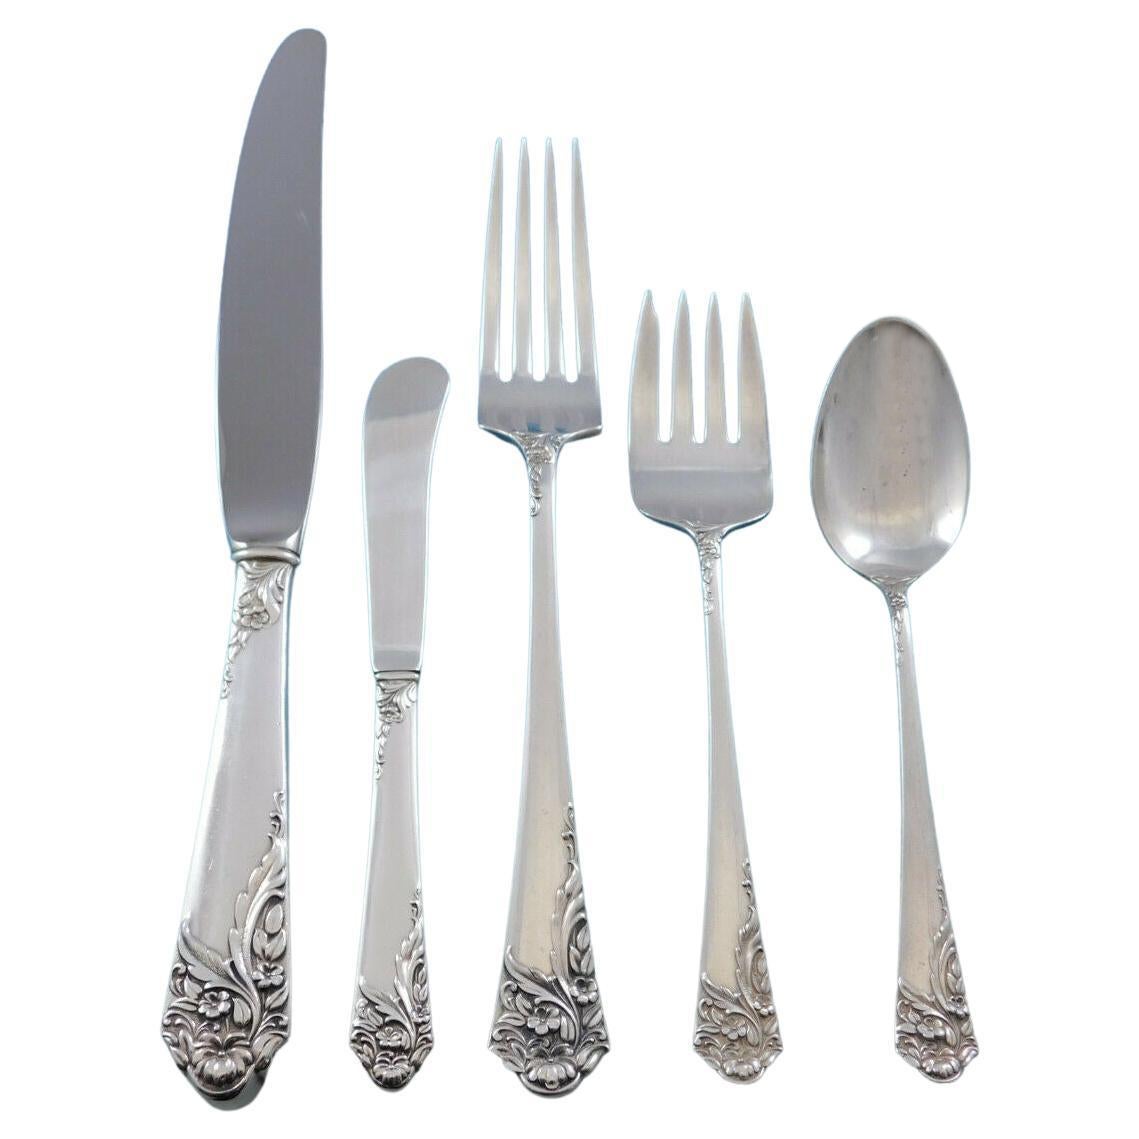 Ecstacy by Amston Sterling Silver Flatware Set for 12 Service 62 Pcs Dinner Size